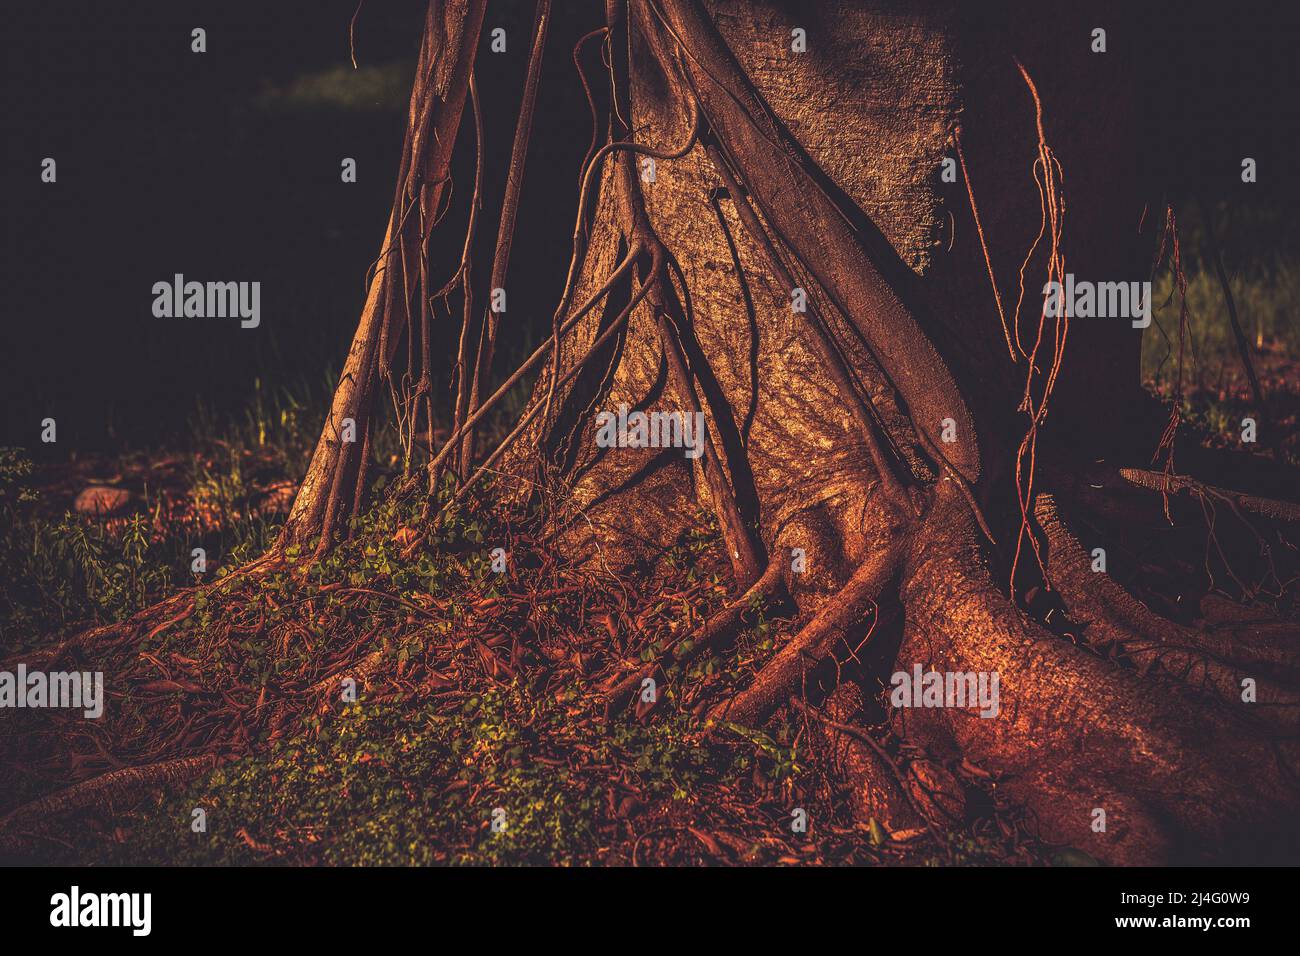 View of ficus nitida tree trunk and roots known as Indian laurel in vintage cinematic color gradations. Stock Photo